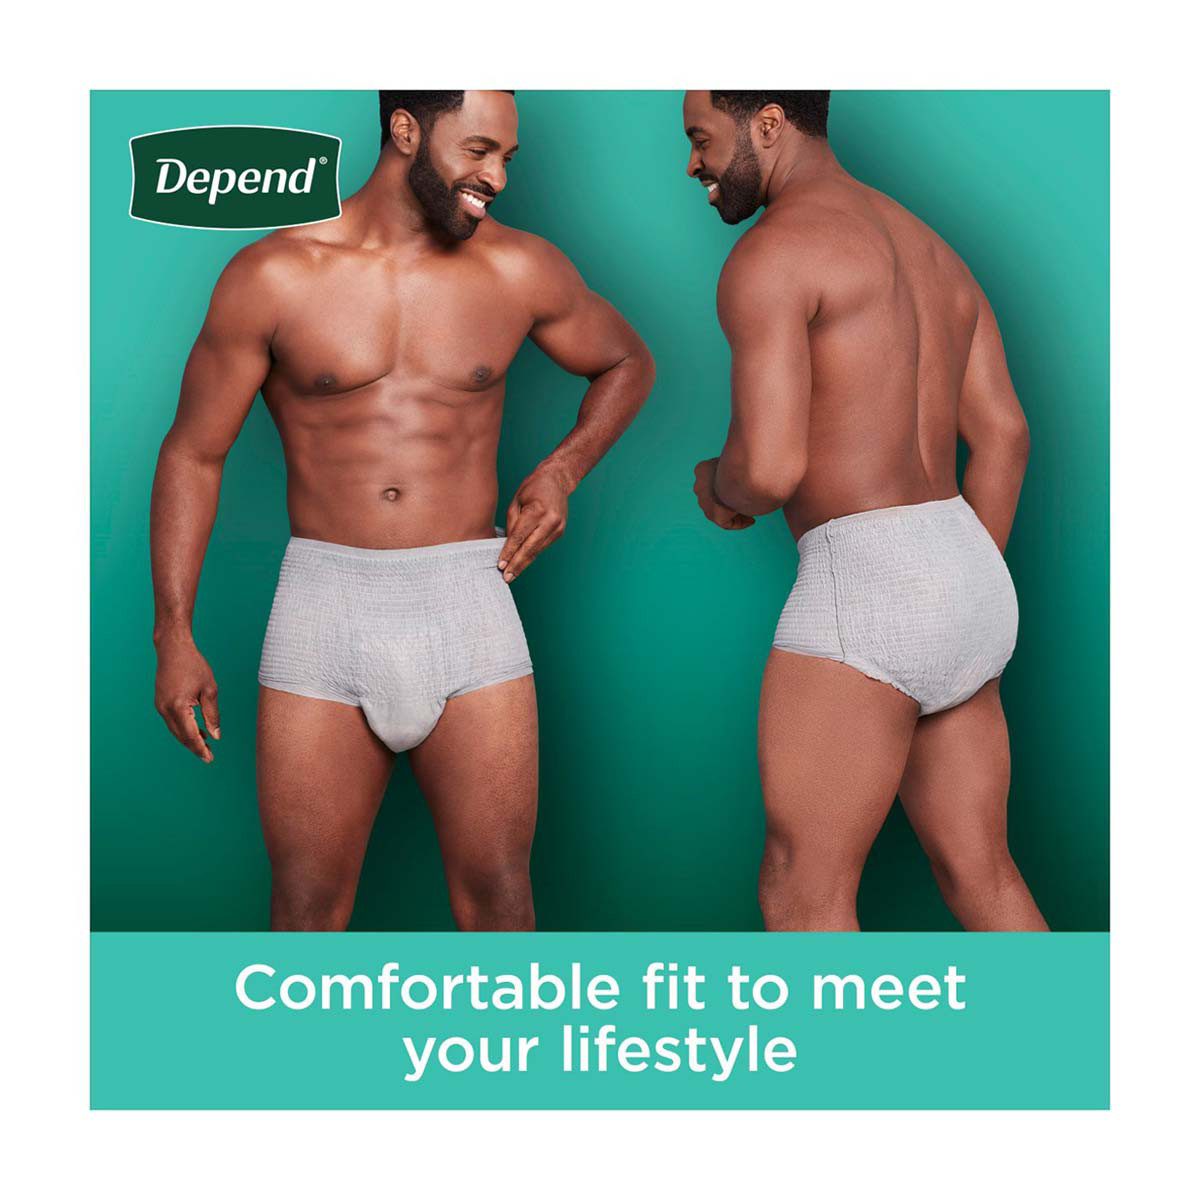 Depend® Fit-Flex Maximum Absorbency Small Incontinence Underwear